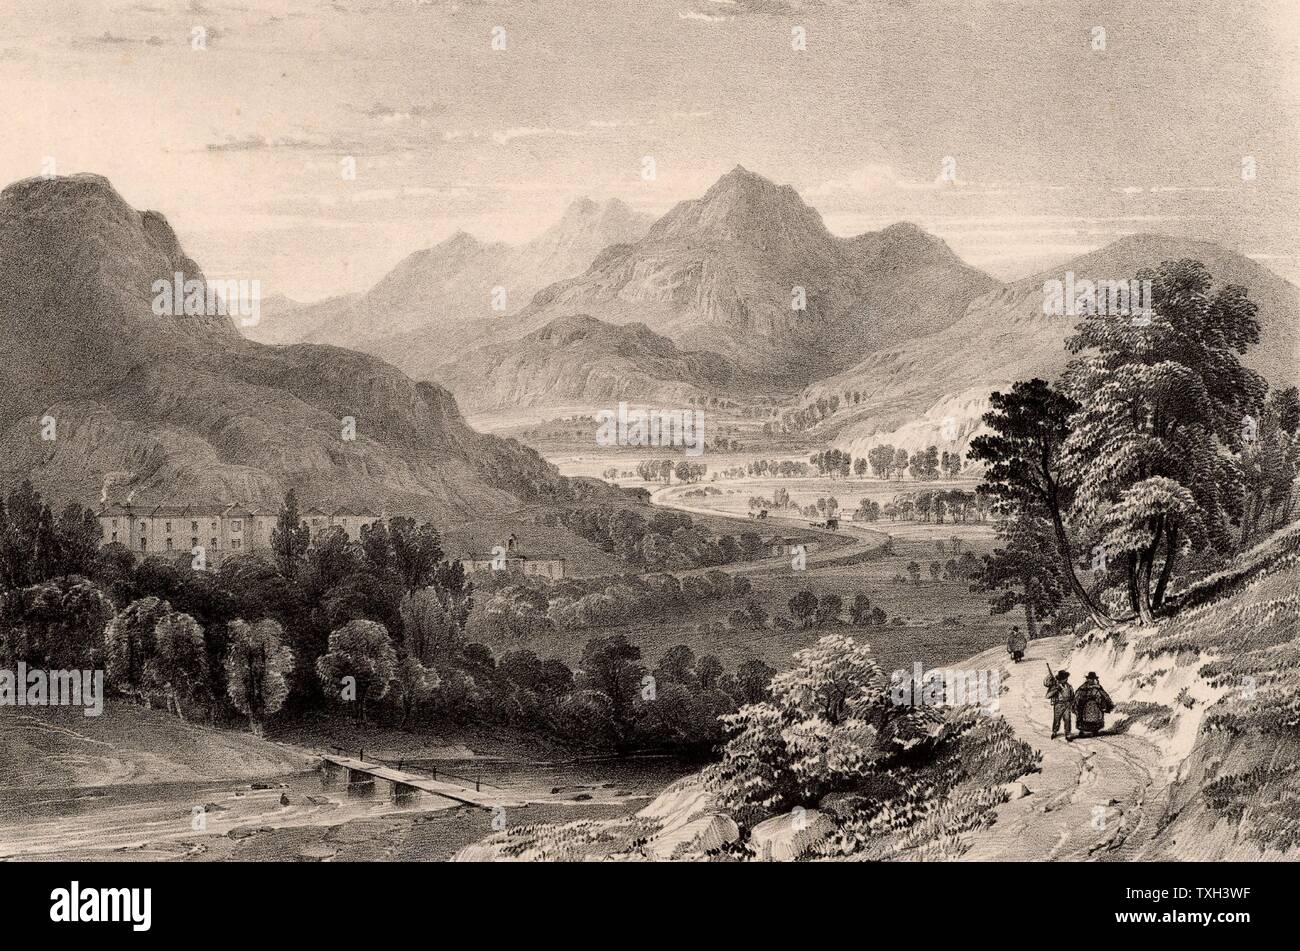 The Inn at Capel Curig from Moel Siabod' near Betws-y-Coed, Snowdonia, North Wales.  In the left foreground a simple wooden plank bridge spans the Afon Lugwy.  In the centre of the picture Thomas Telford's London to Holyhead road, the A5, winds through the valley.   Lithograph c1850. Stock Photo